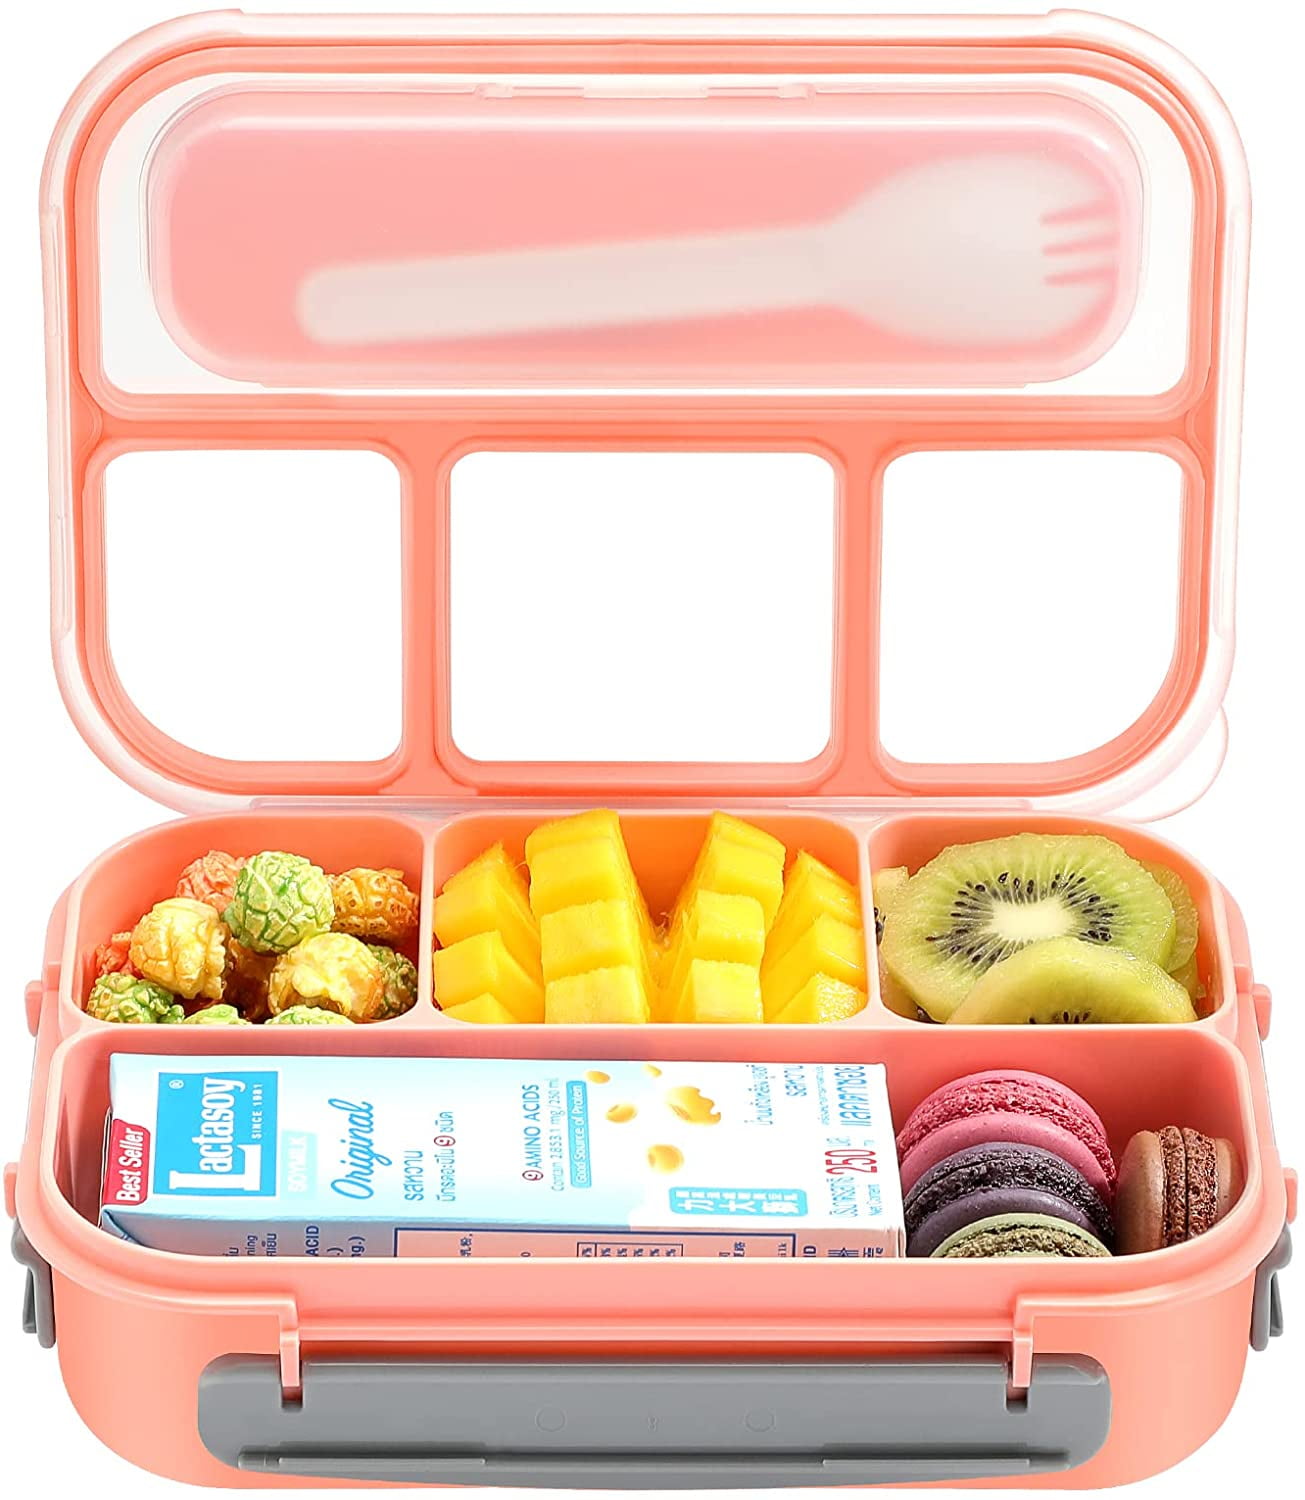 Large Bento Box Lunch Containers Adult Kids Toddler Lunchable Container for  Daycare Snack Snackle Box Container 1300 ml - 4 Compartments & Fork , Leak